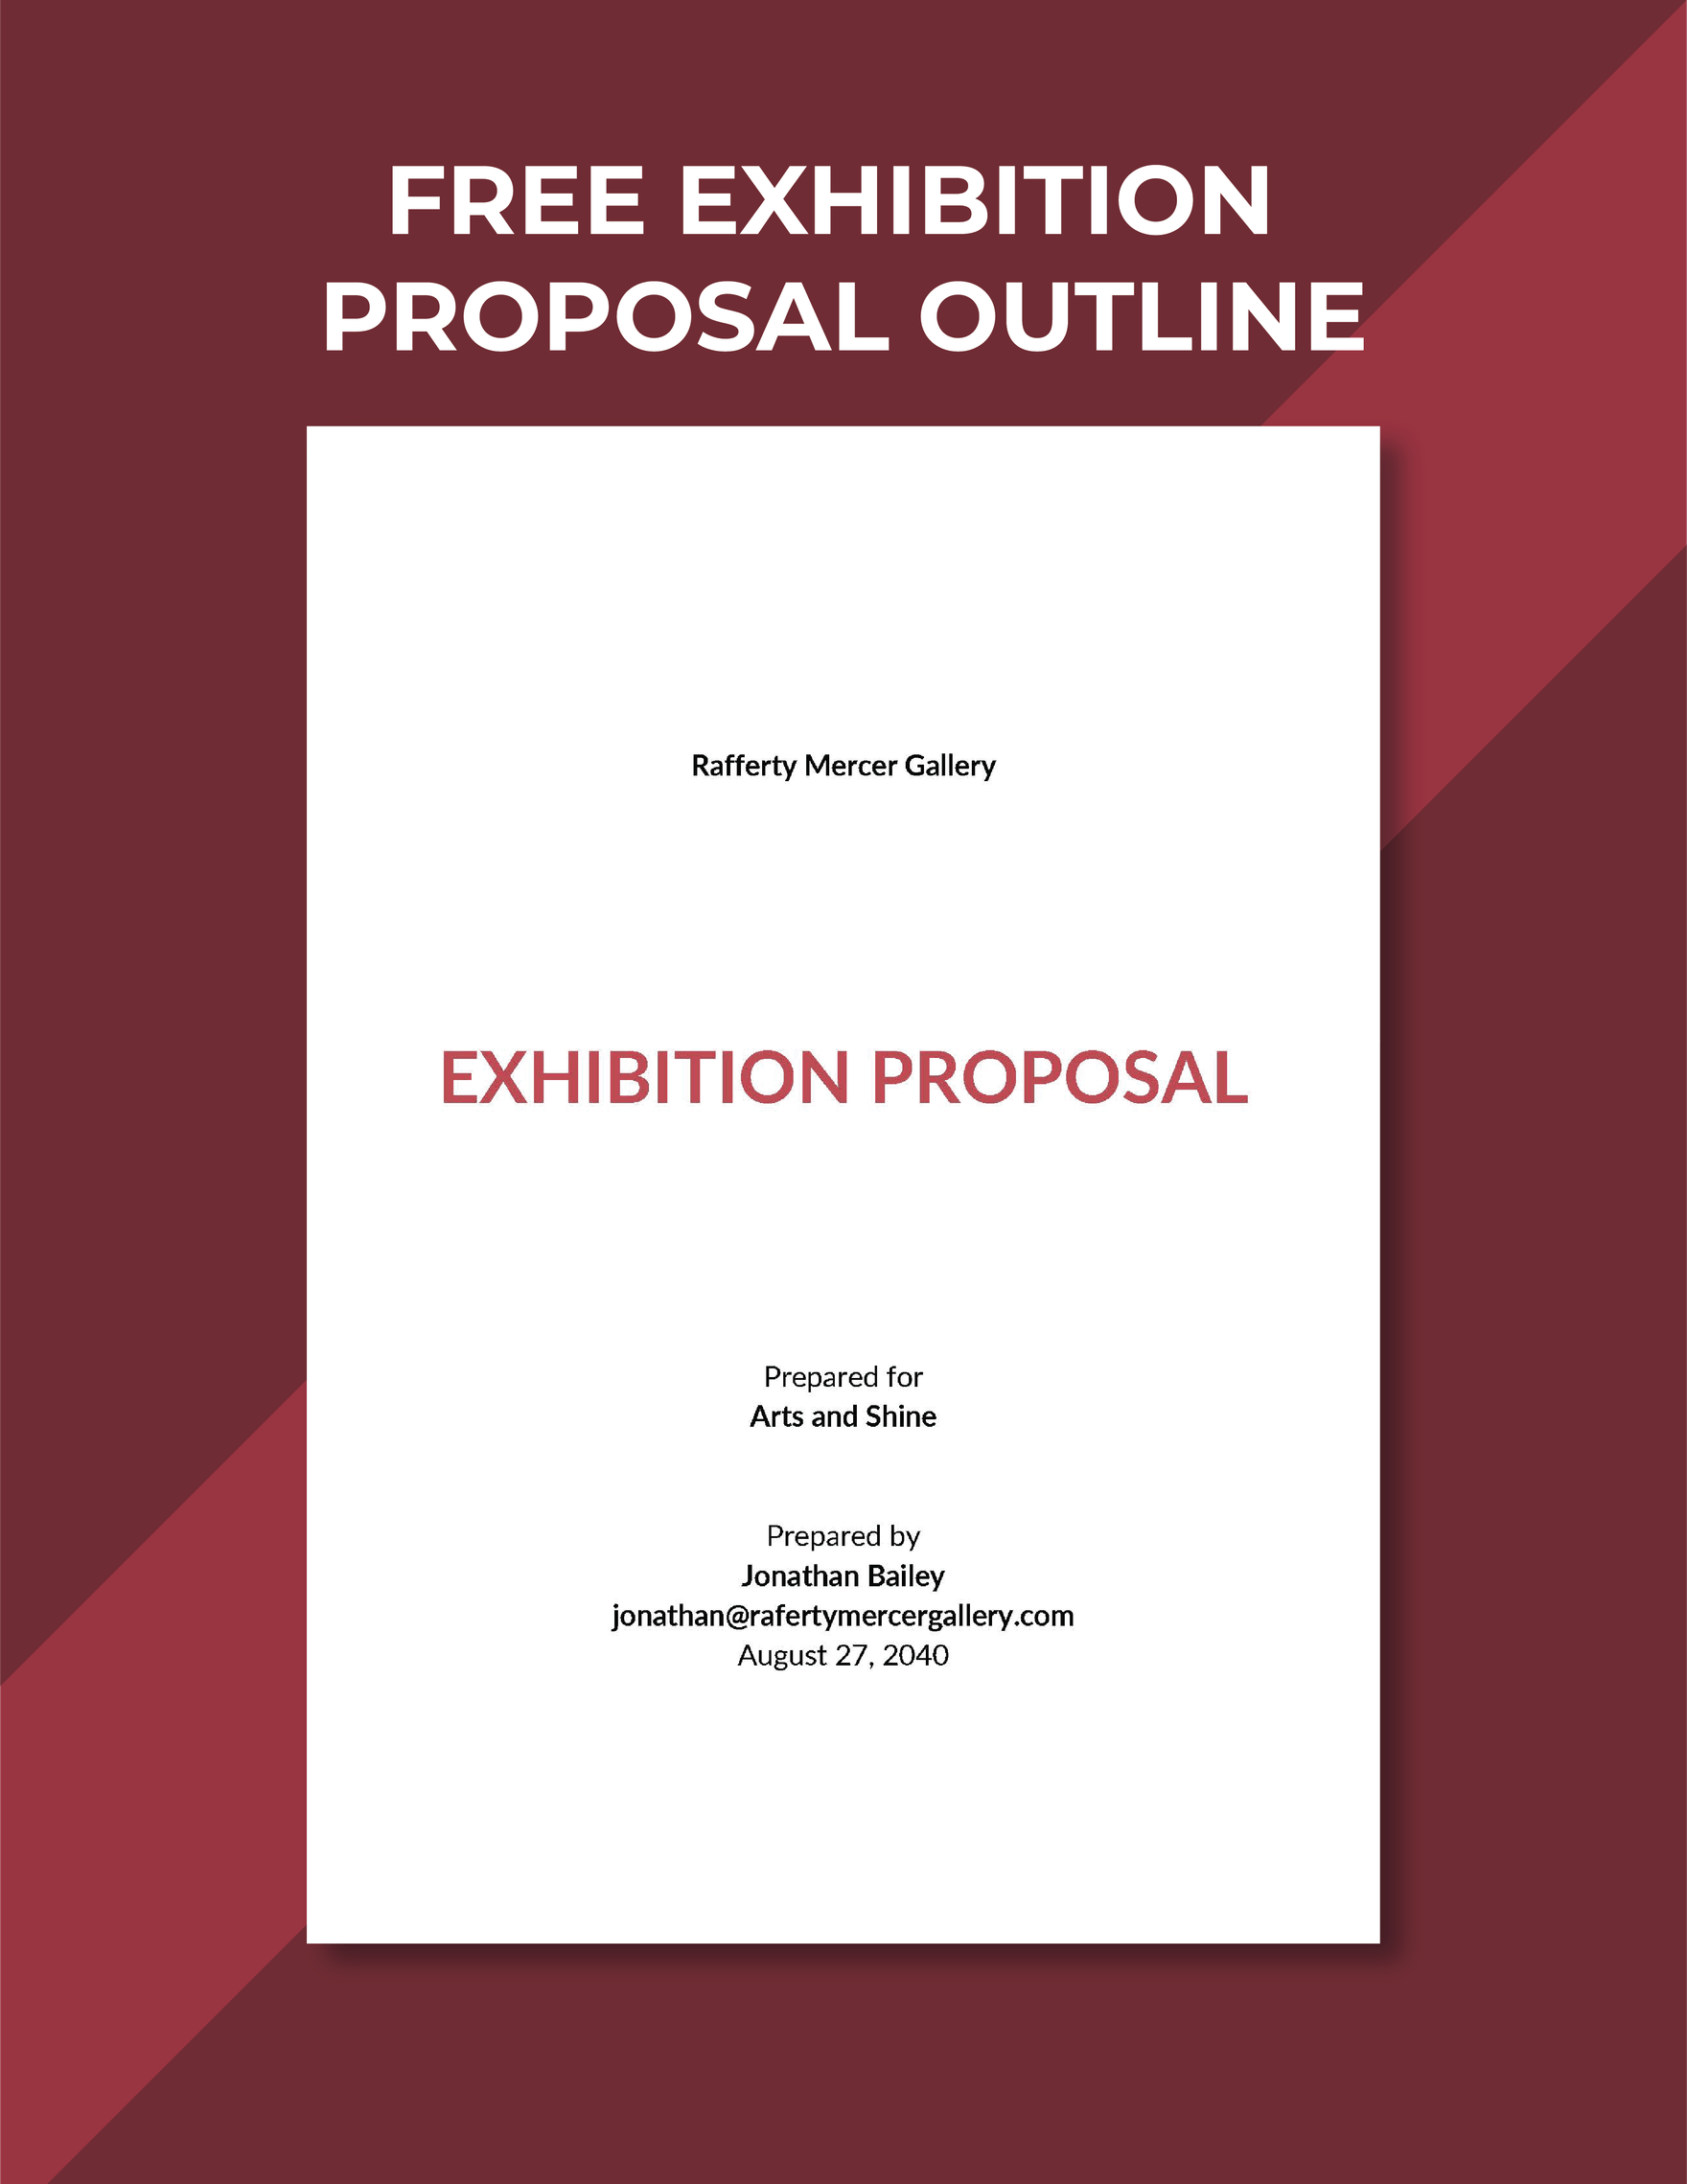 Exhibition Proposal Outline Template